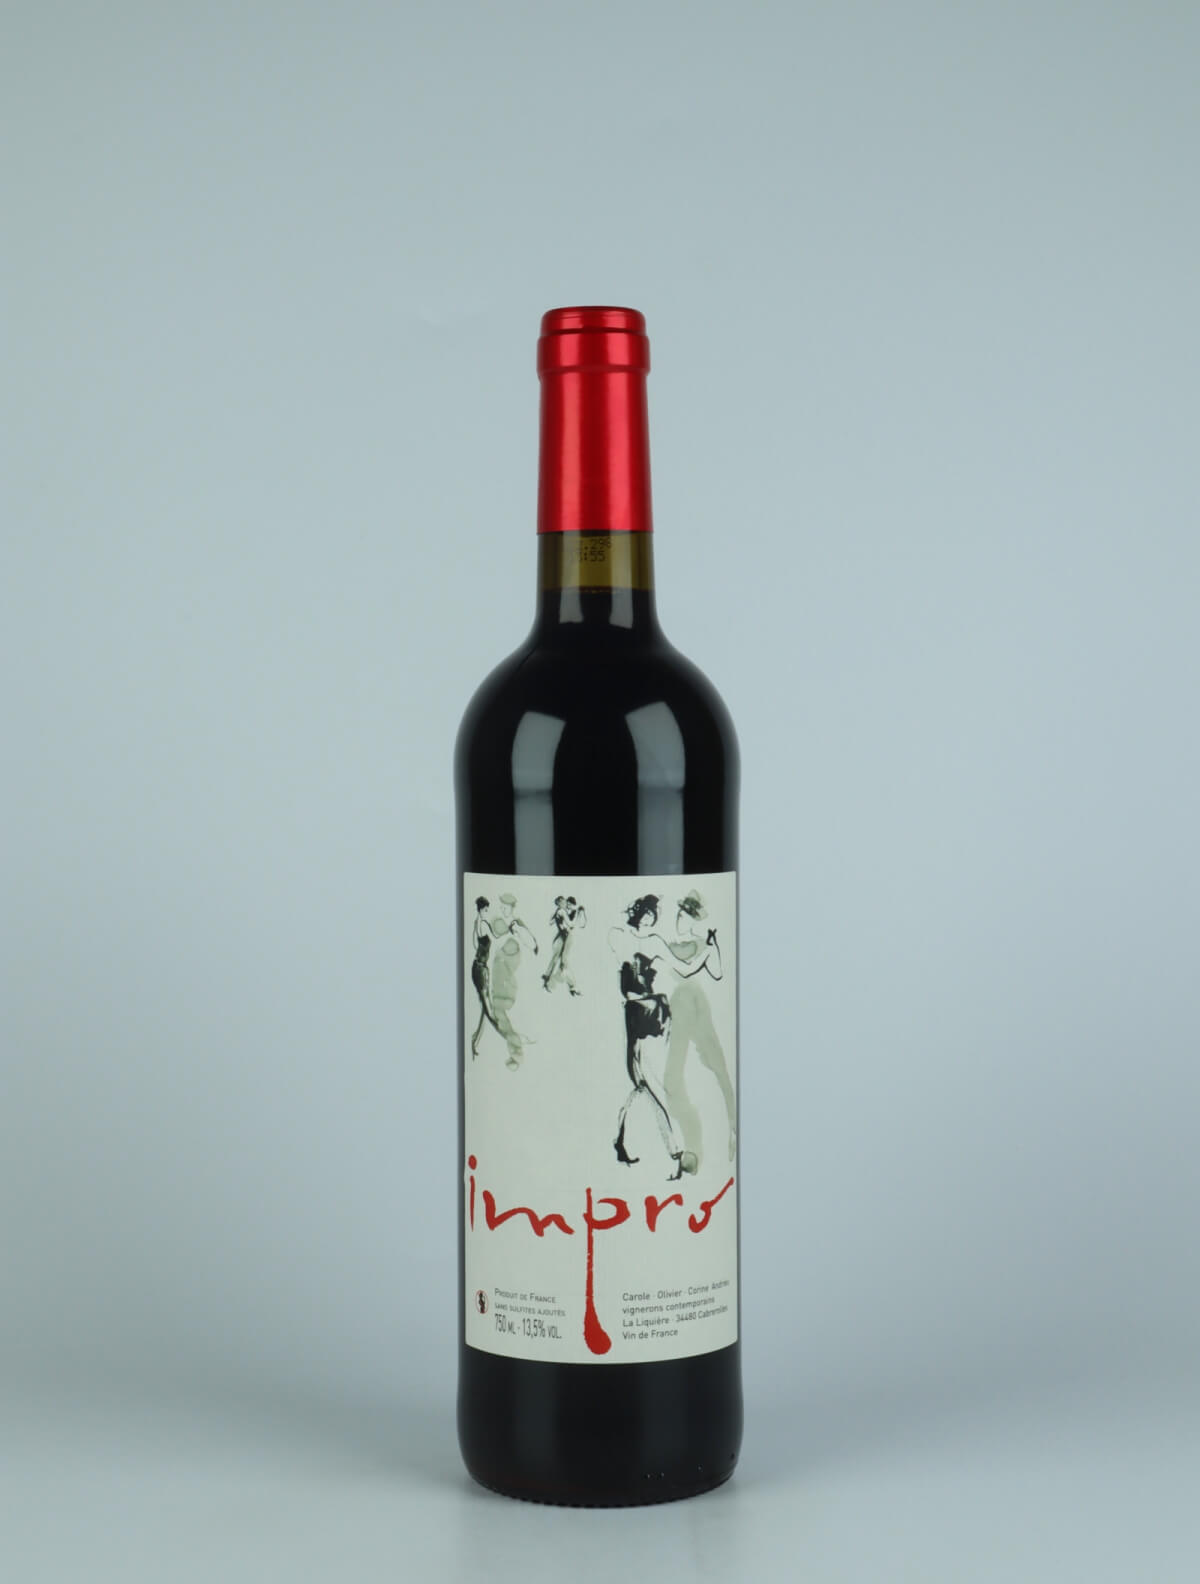 A bottle 2021 Impro Red wine from Clos Fantine, Languedoc in France